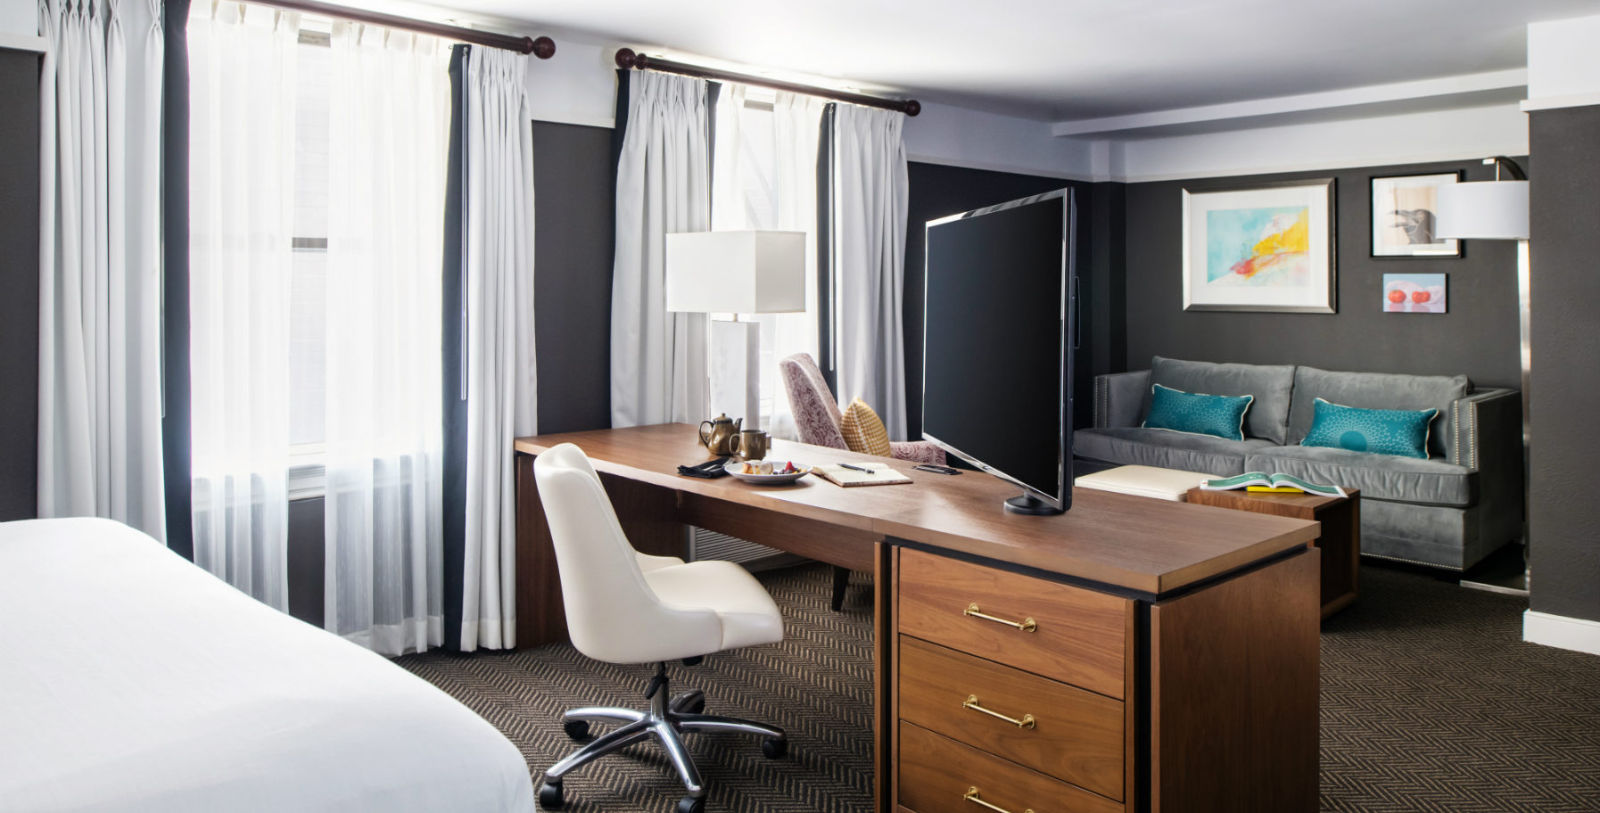 Image of Comfy Suite at The Commonwealth, 1912, Member of Historic Hotels of America since 2023, in Richmond, Virginia